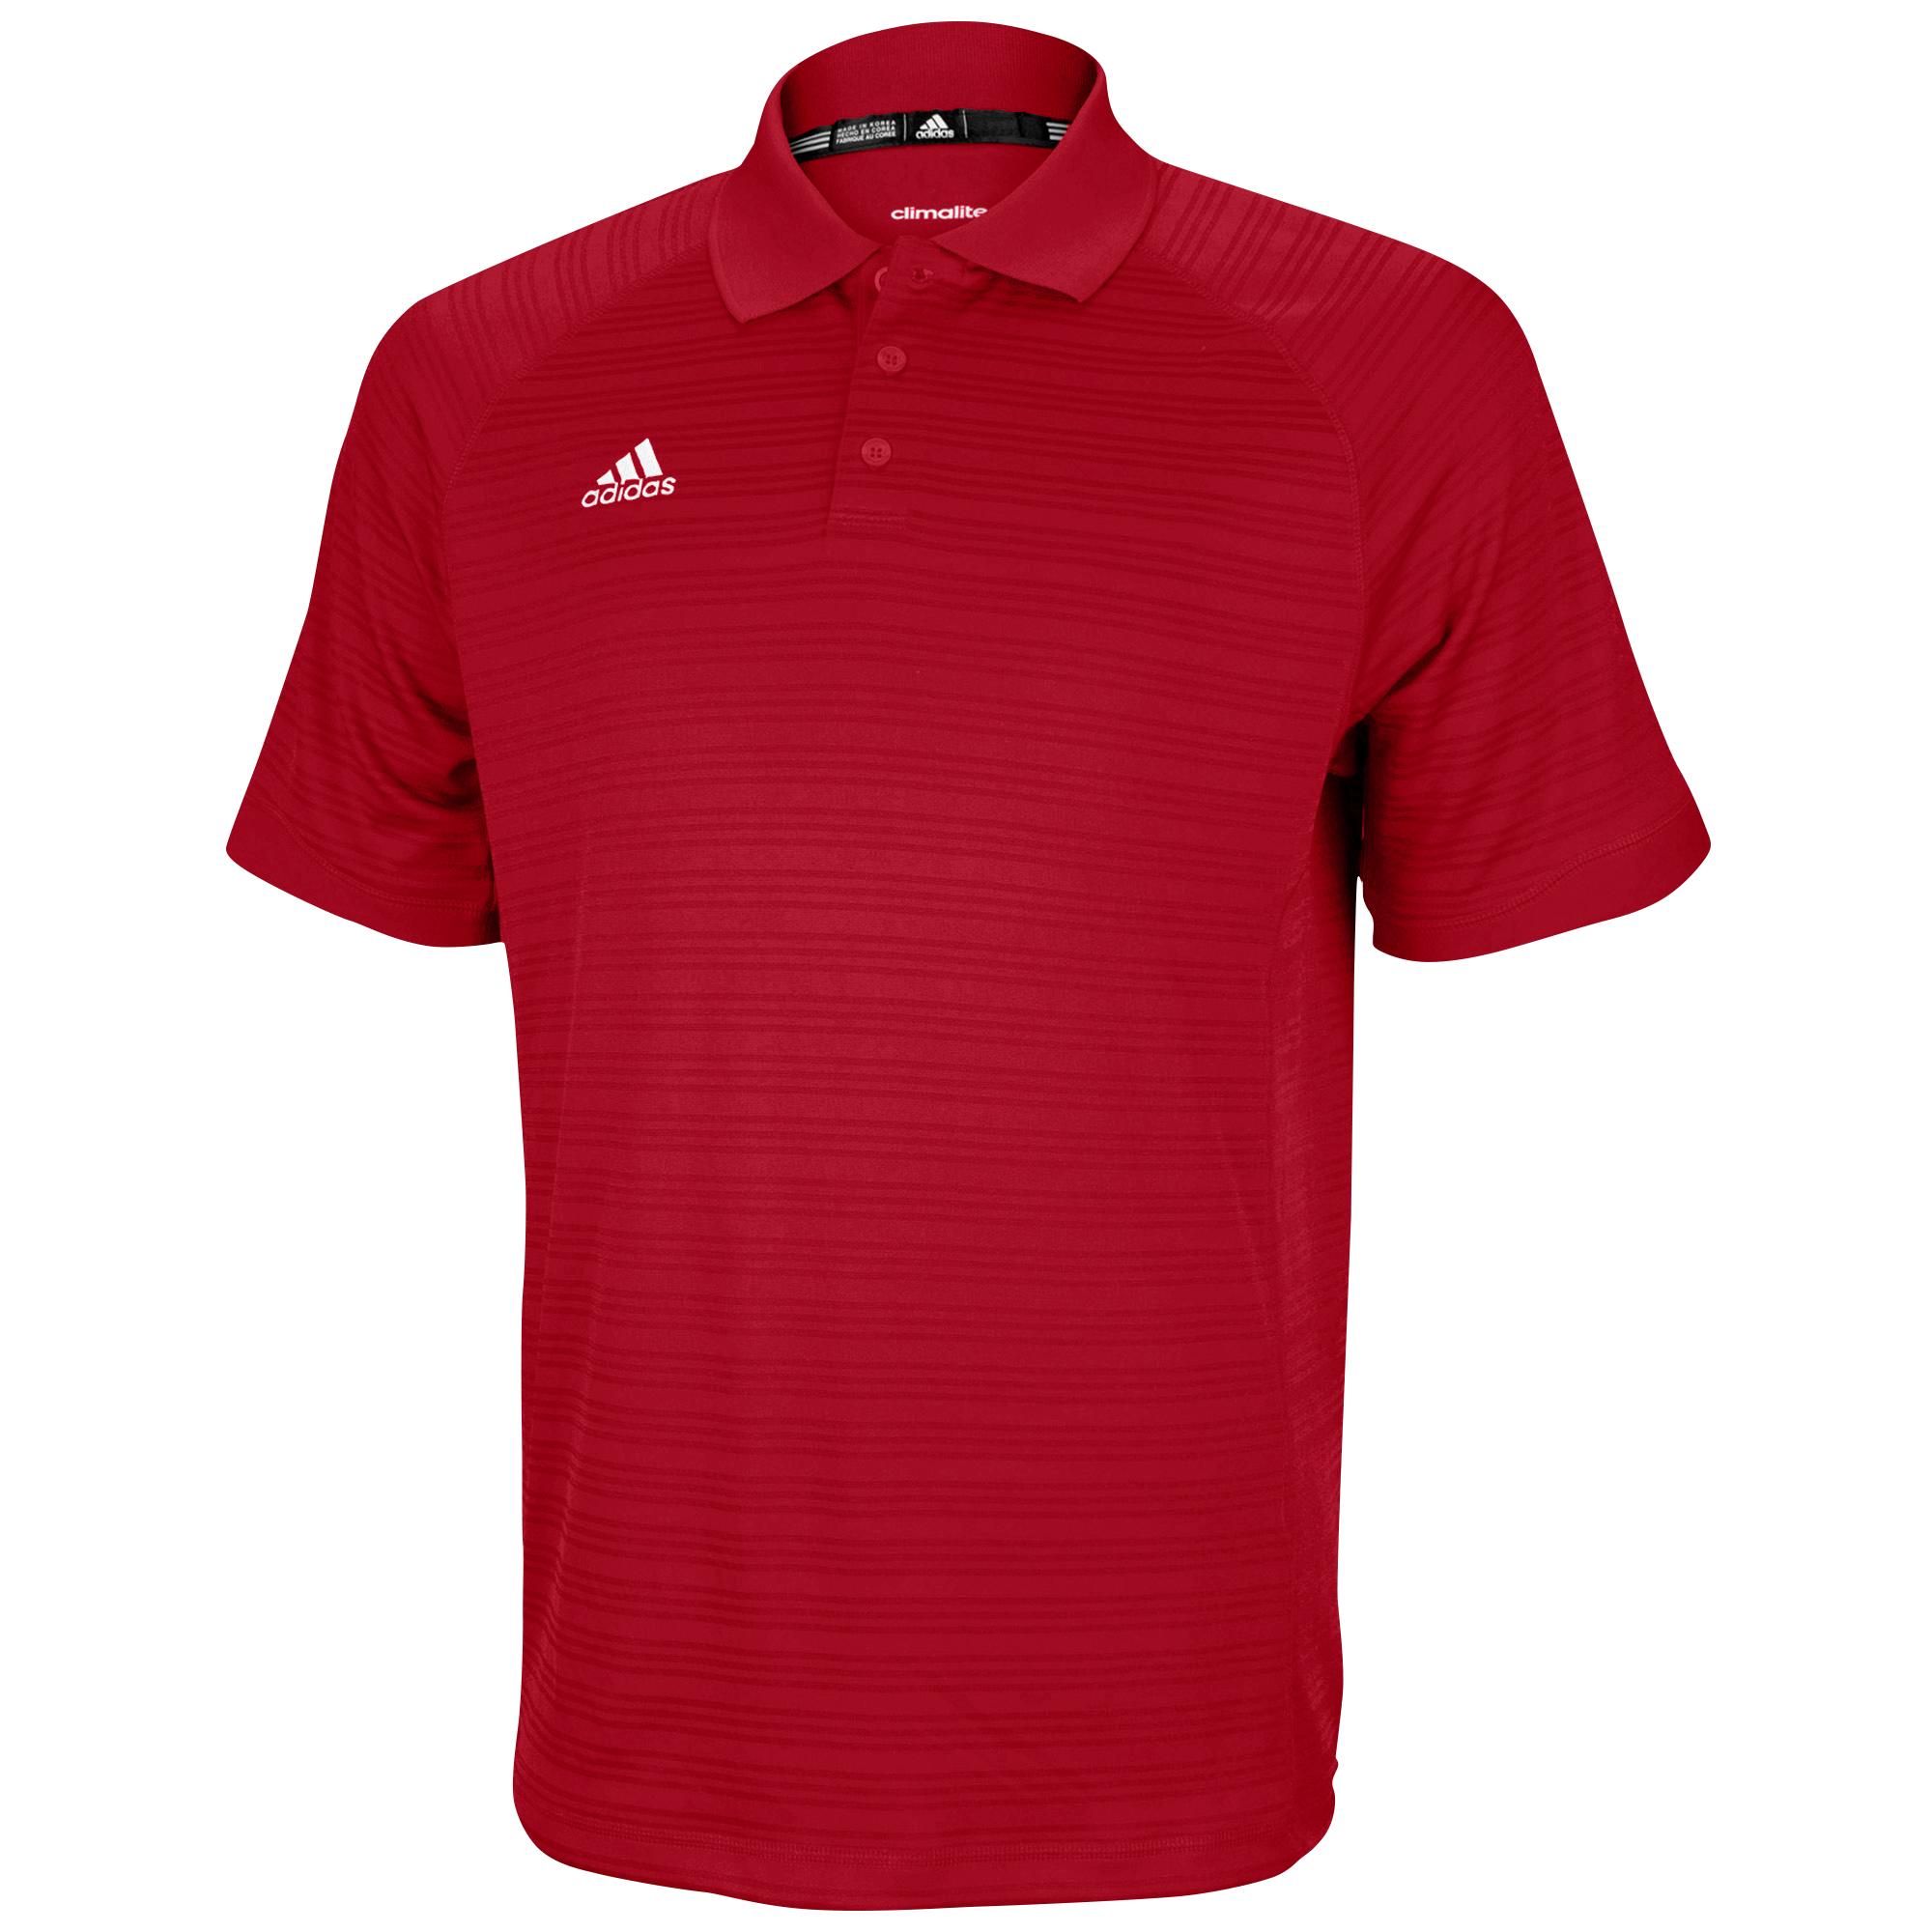  adidas  Climalite Team  Select Polo  Shirt in Red for Men Lyst